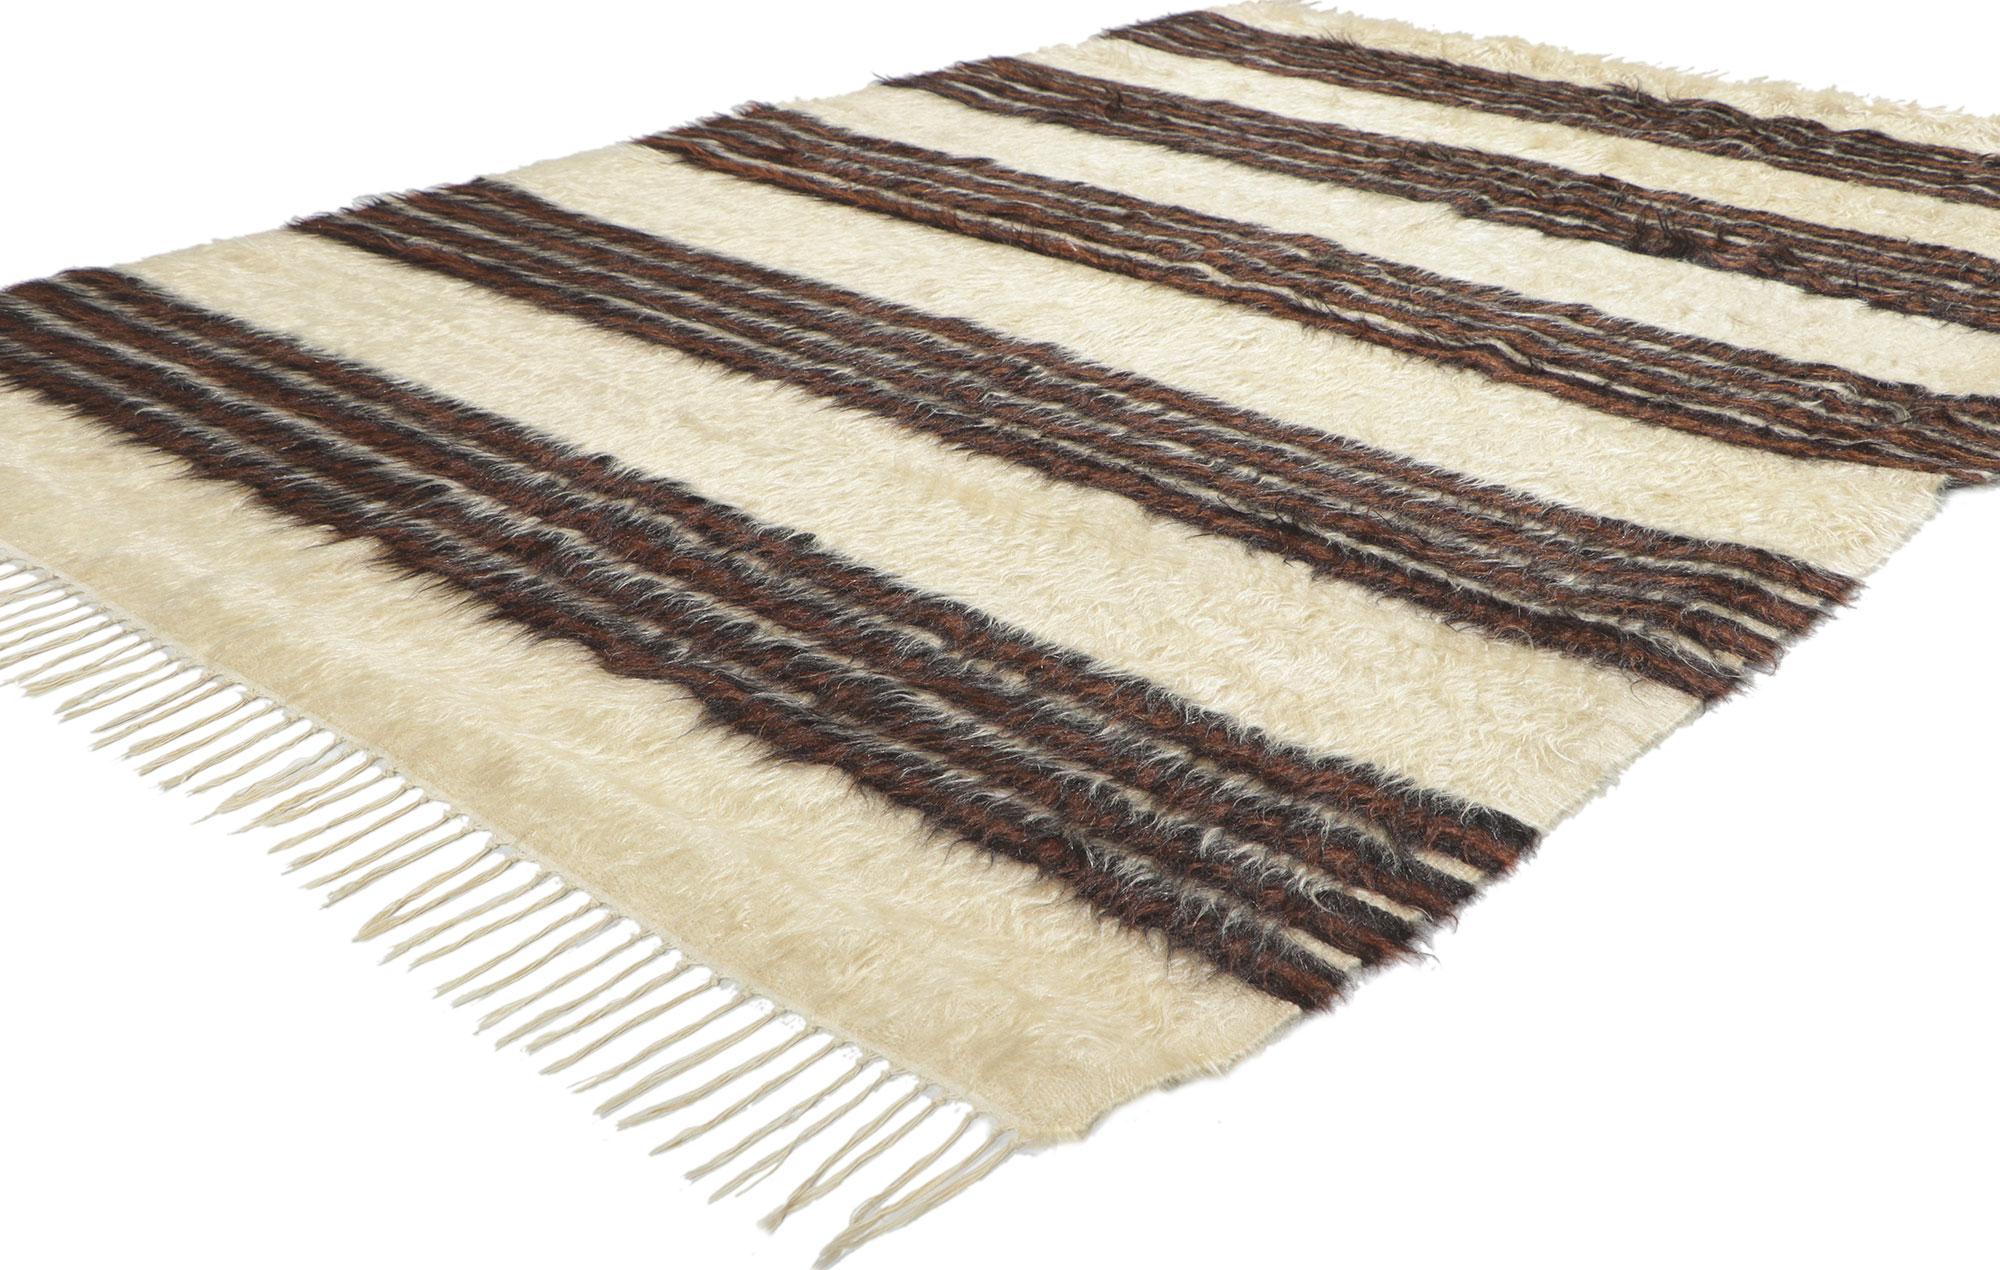 53837 Vintage Turkish Angora Wool Kilim Blanket Rug, 04'08 x 06'08. With its shaggy pile, incredible detail and texture, this handwoven Turkish angora kilim rug is a captivating vision of woven beauty. The eye-catching striped pattern and earthy